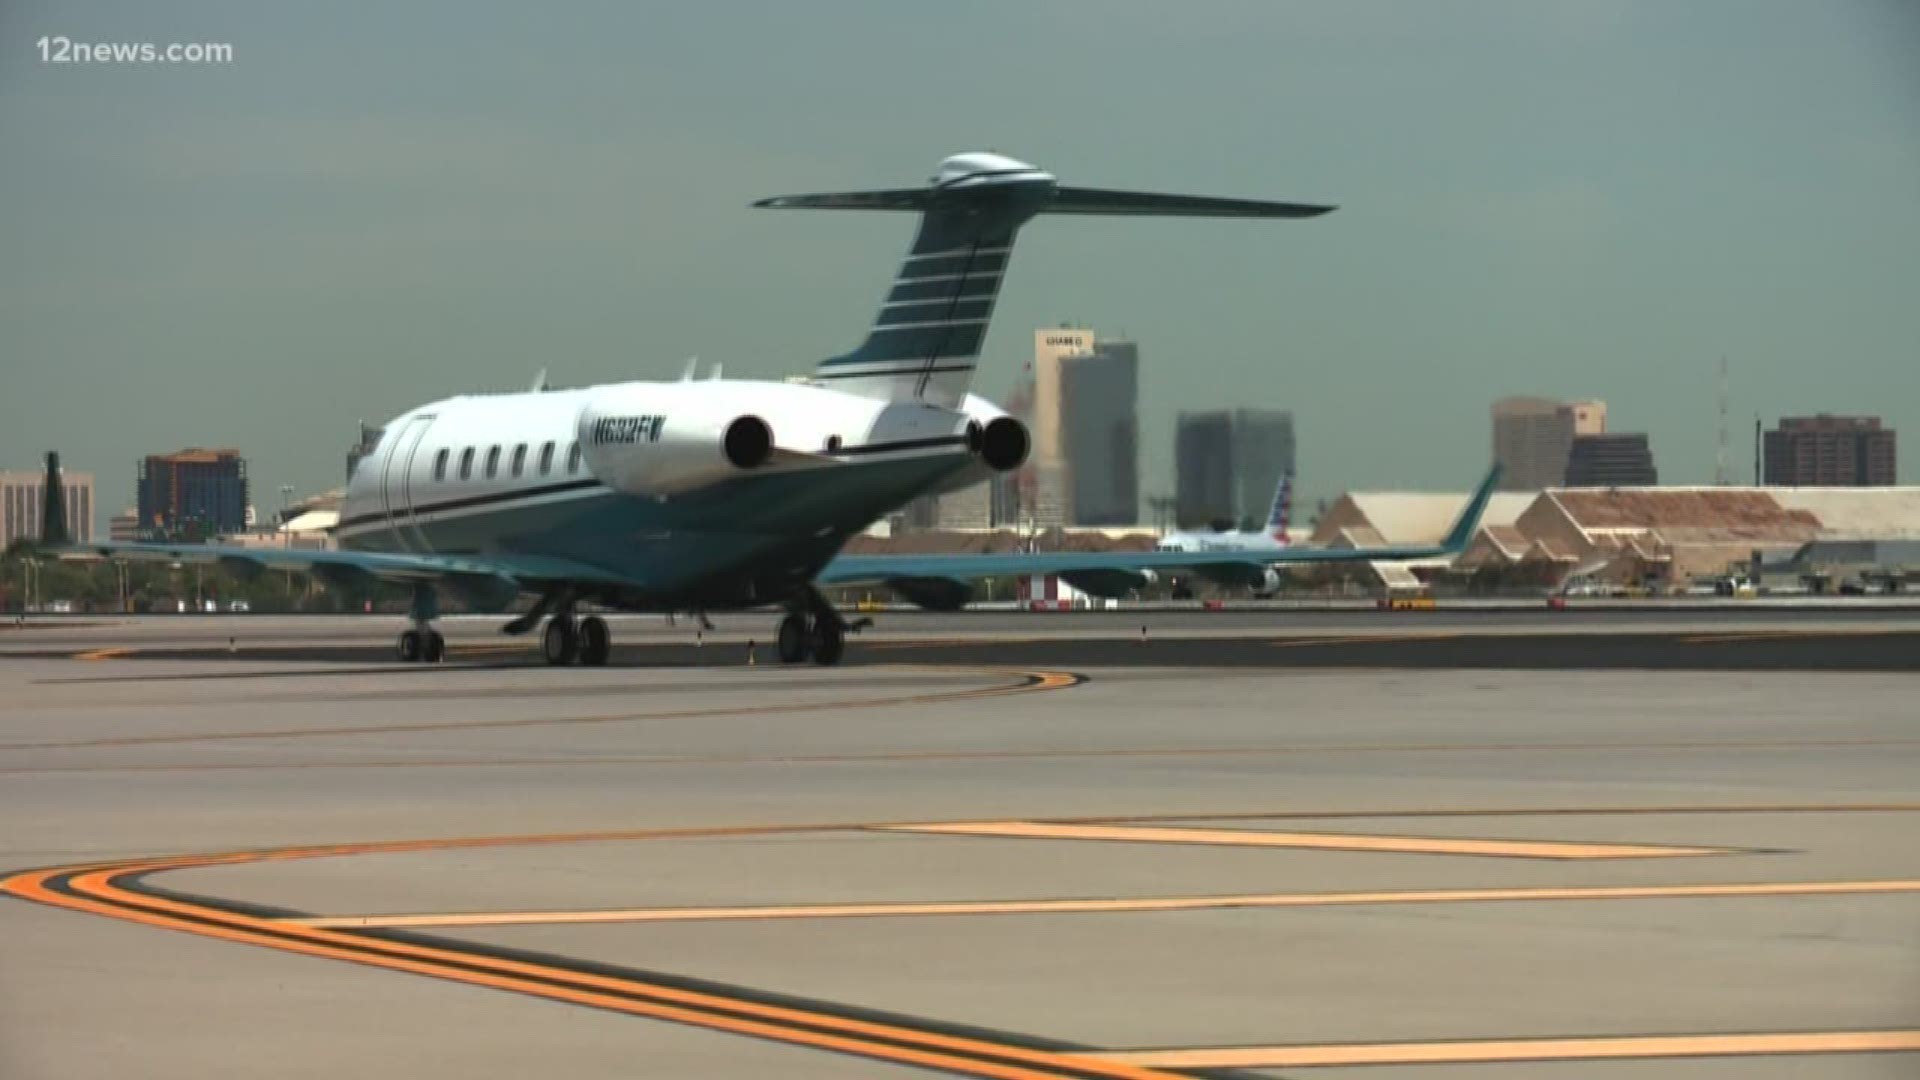 With the growth of the Valley, officials seek ways to expand the Phoenix Sky Harbor International Airport.